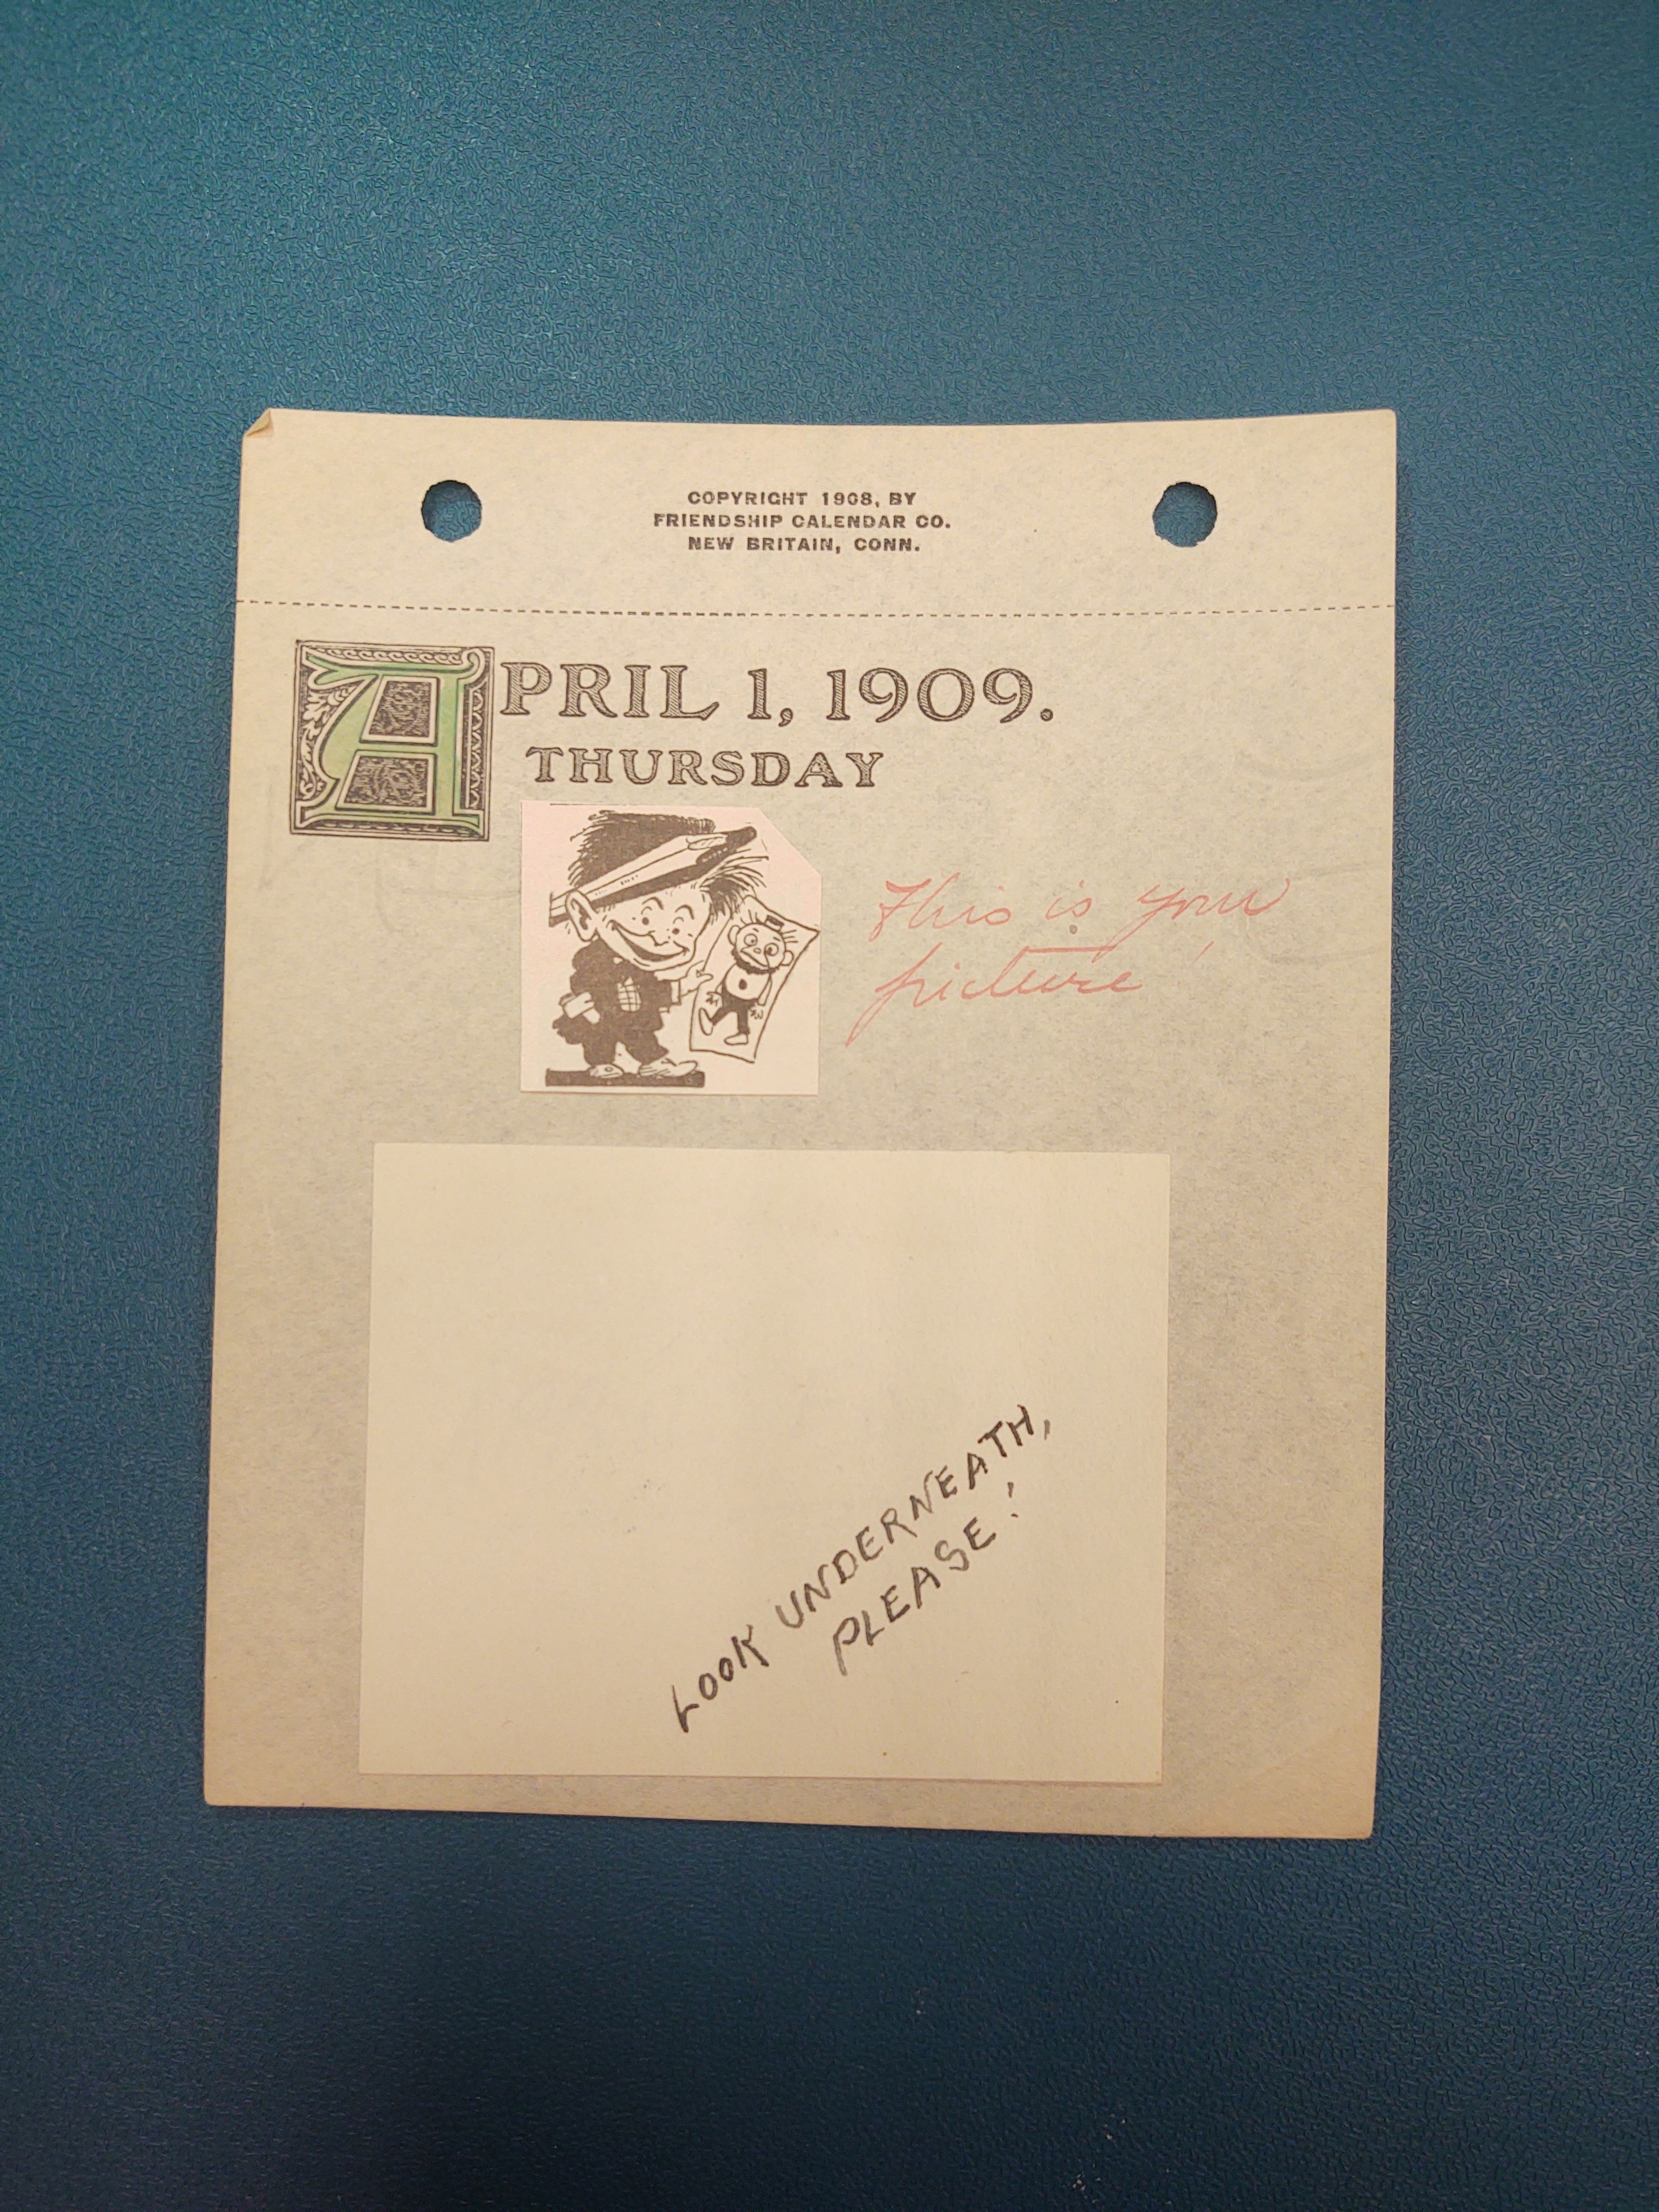 April 1, 1909. Thursday: A short man with a big a pencil behind his ear is shown holding up a piece of paper with a drawing on it. The drawing on the paper is of another goofy looking man. The image appears to be cut out (probably from a magazine) and pasted onto the page.